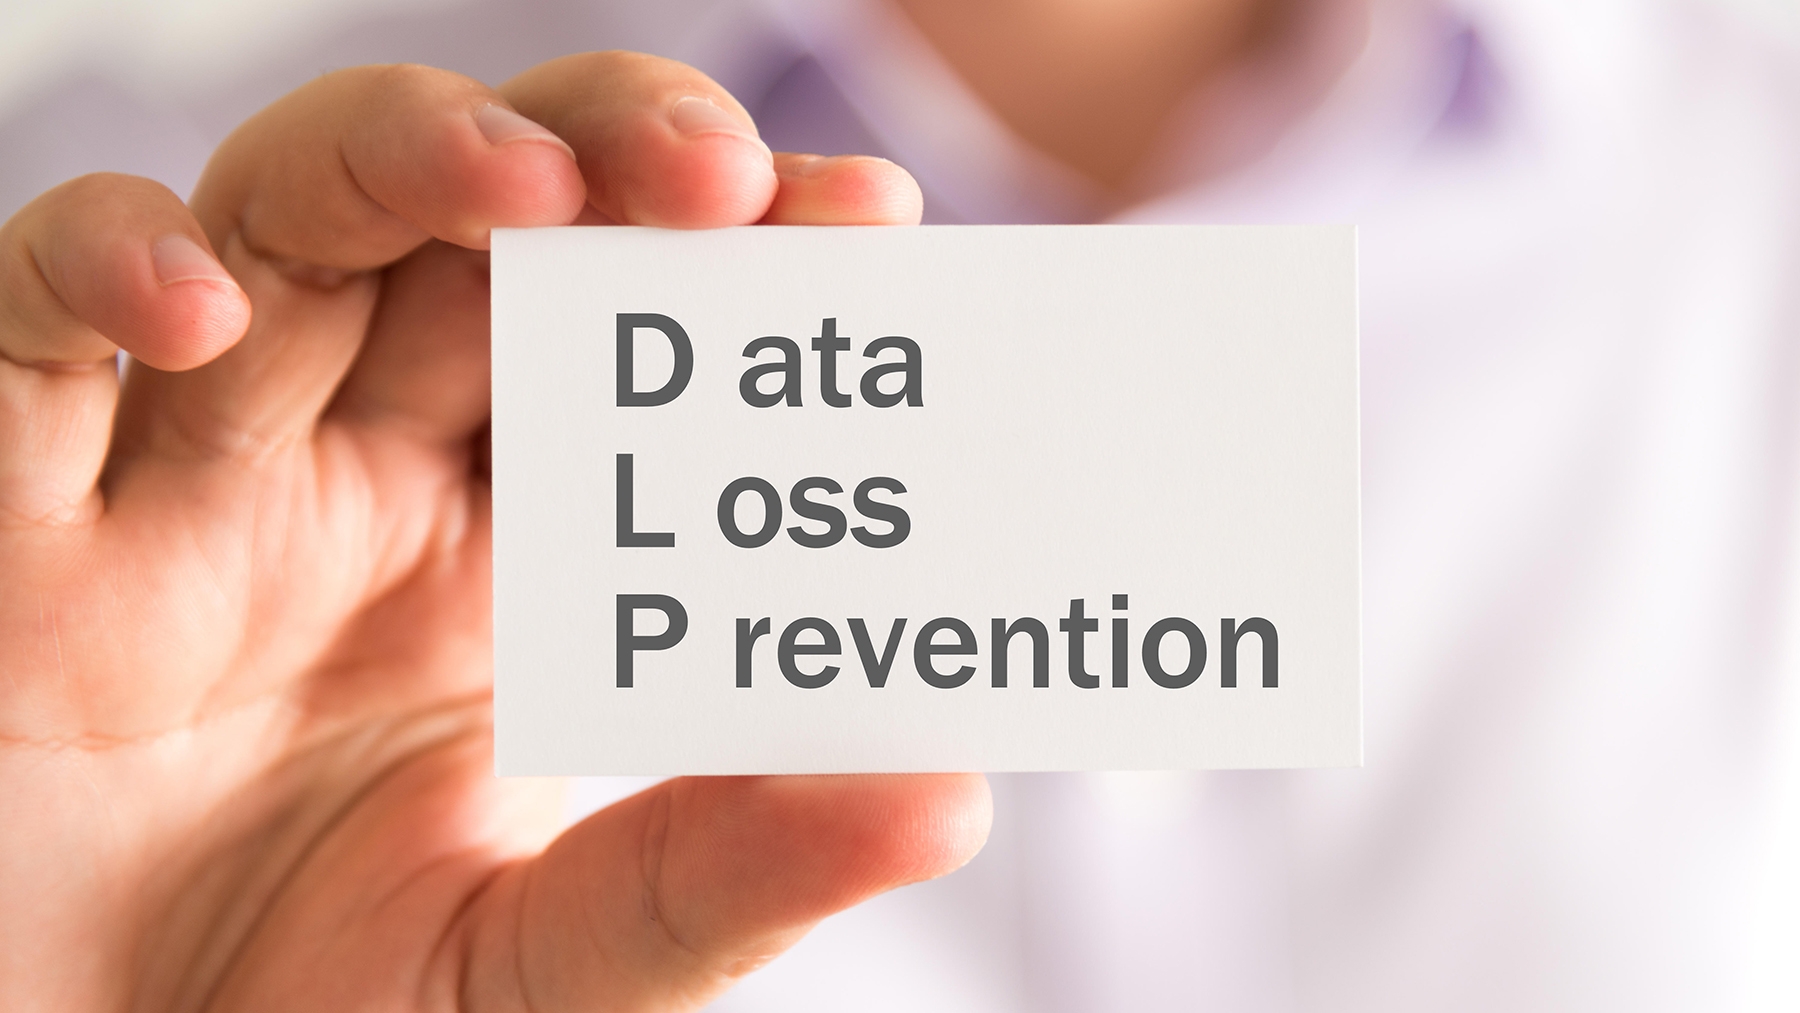 InfoSec 101: Why Data Loss Prevention is Important to Enterprise Defense